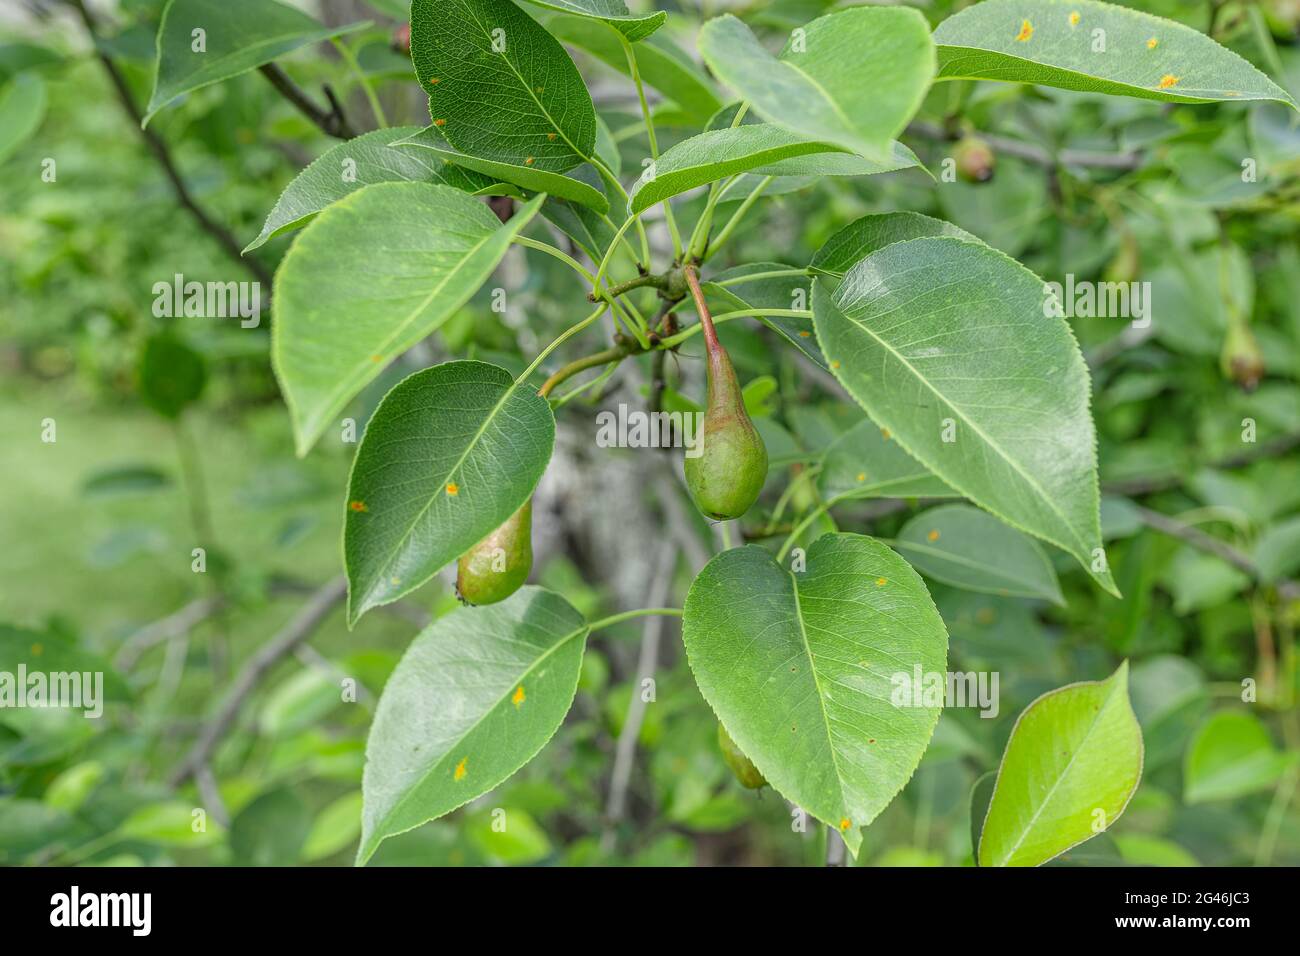 Fragment of a pear tree with fruits and leaves affected by the disease rust Stock Photo